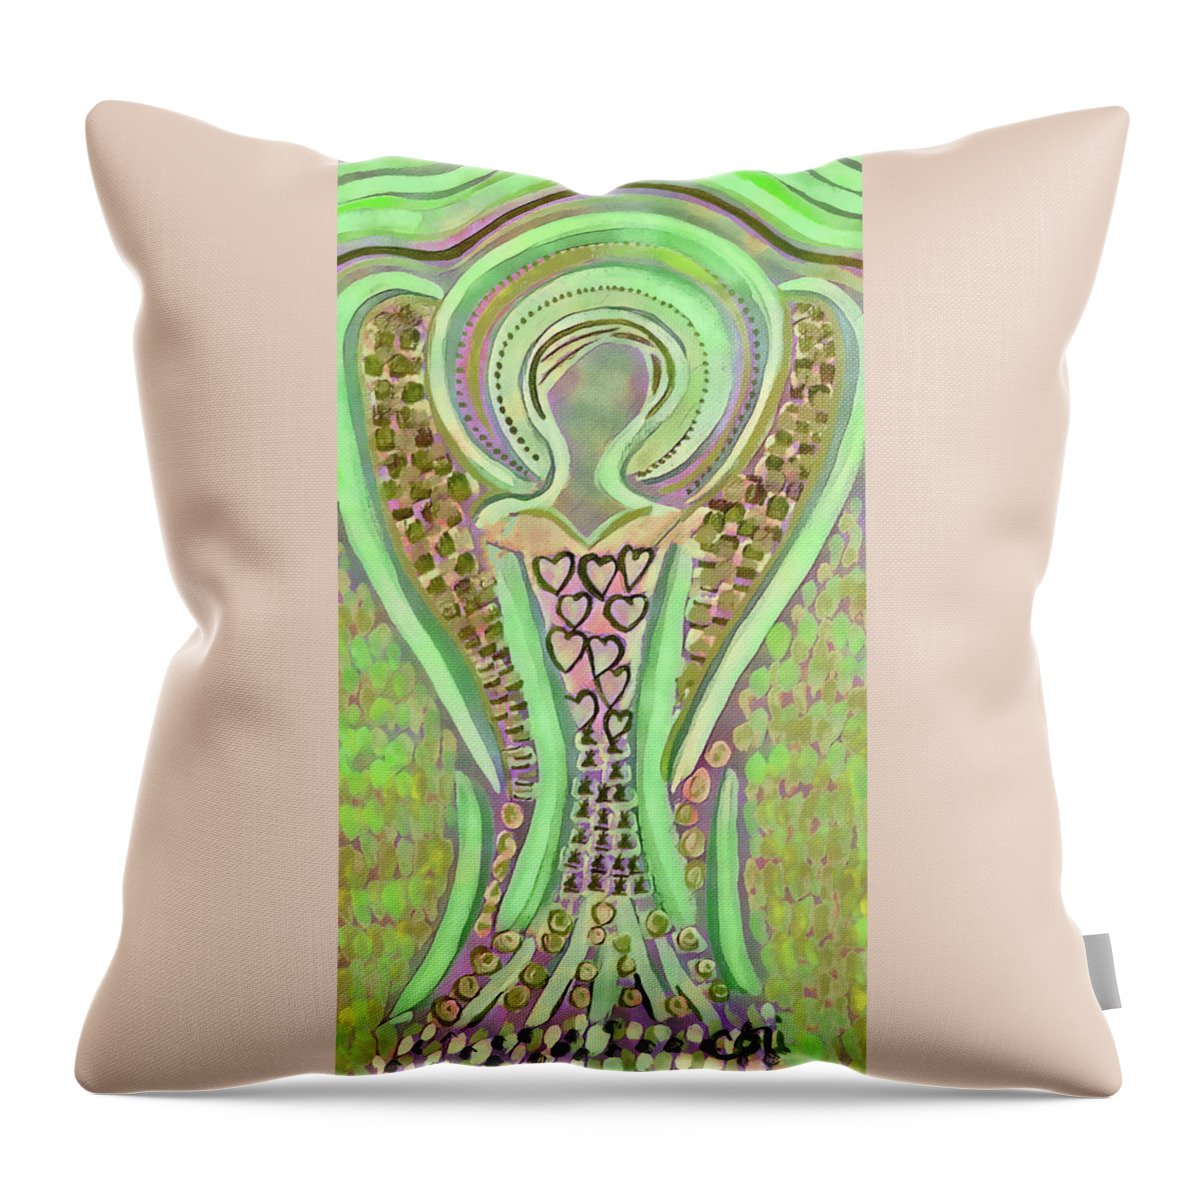 Angel Throw Pillow featuring the painting Angel by the Sea in Green and Gold by Corinne Carroll